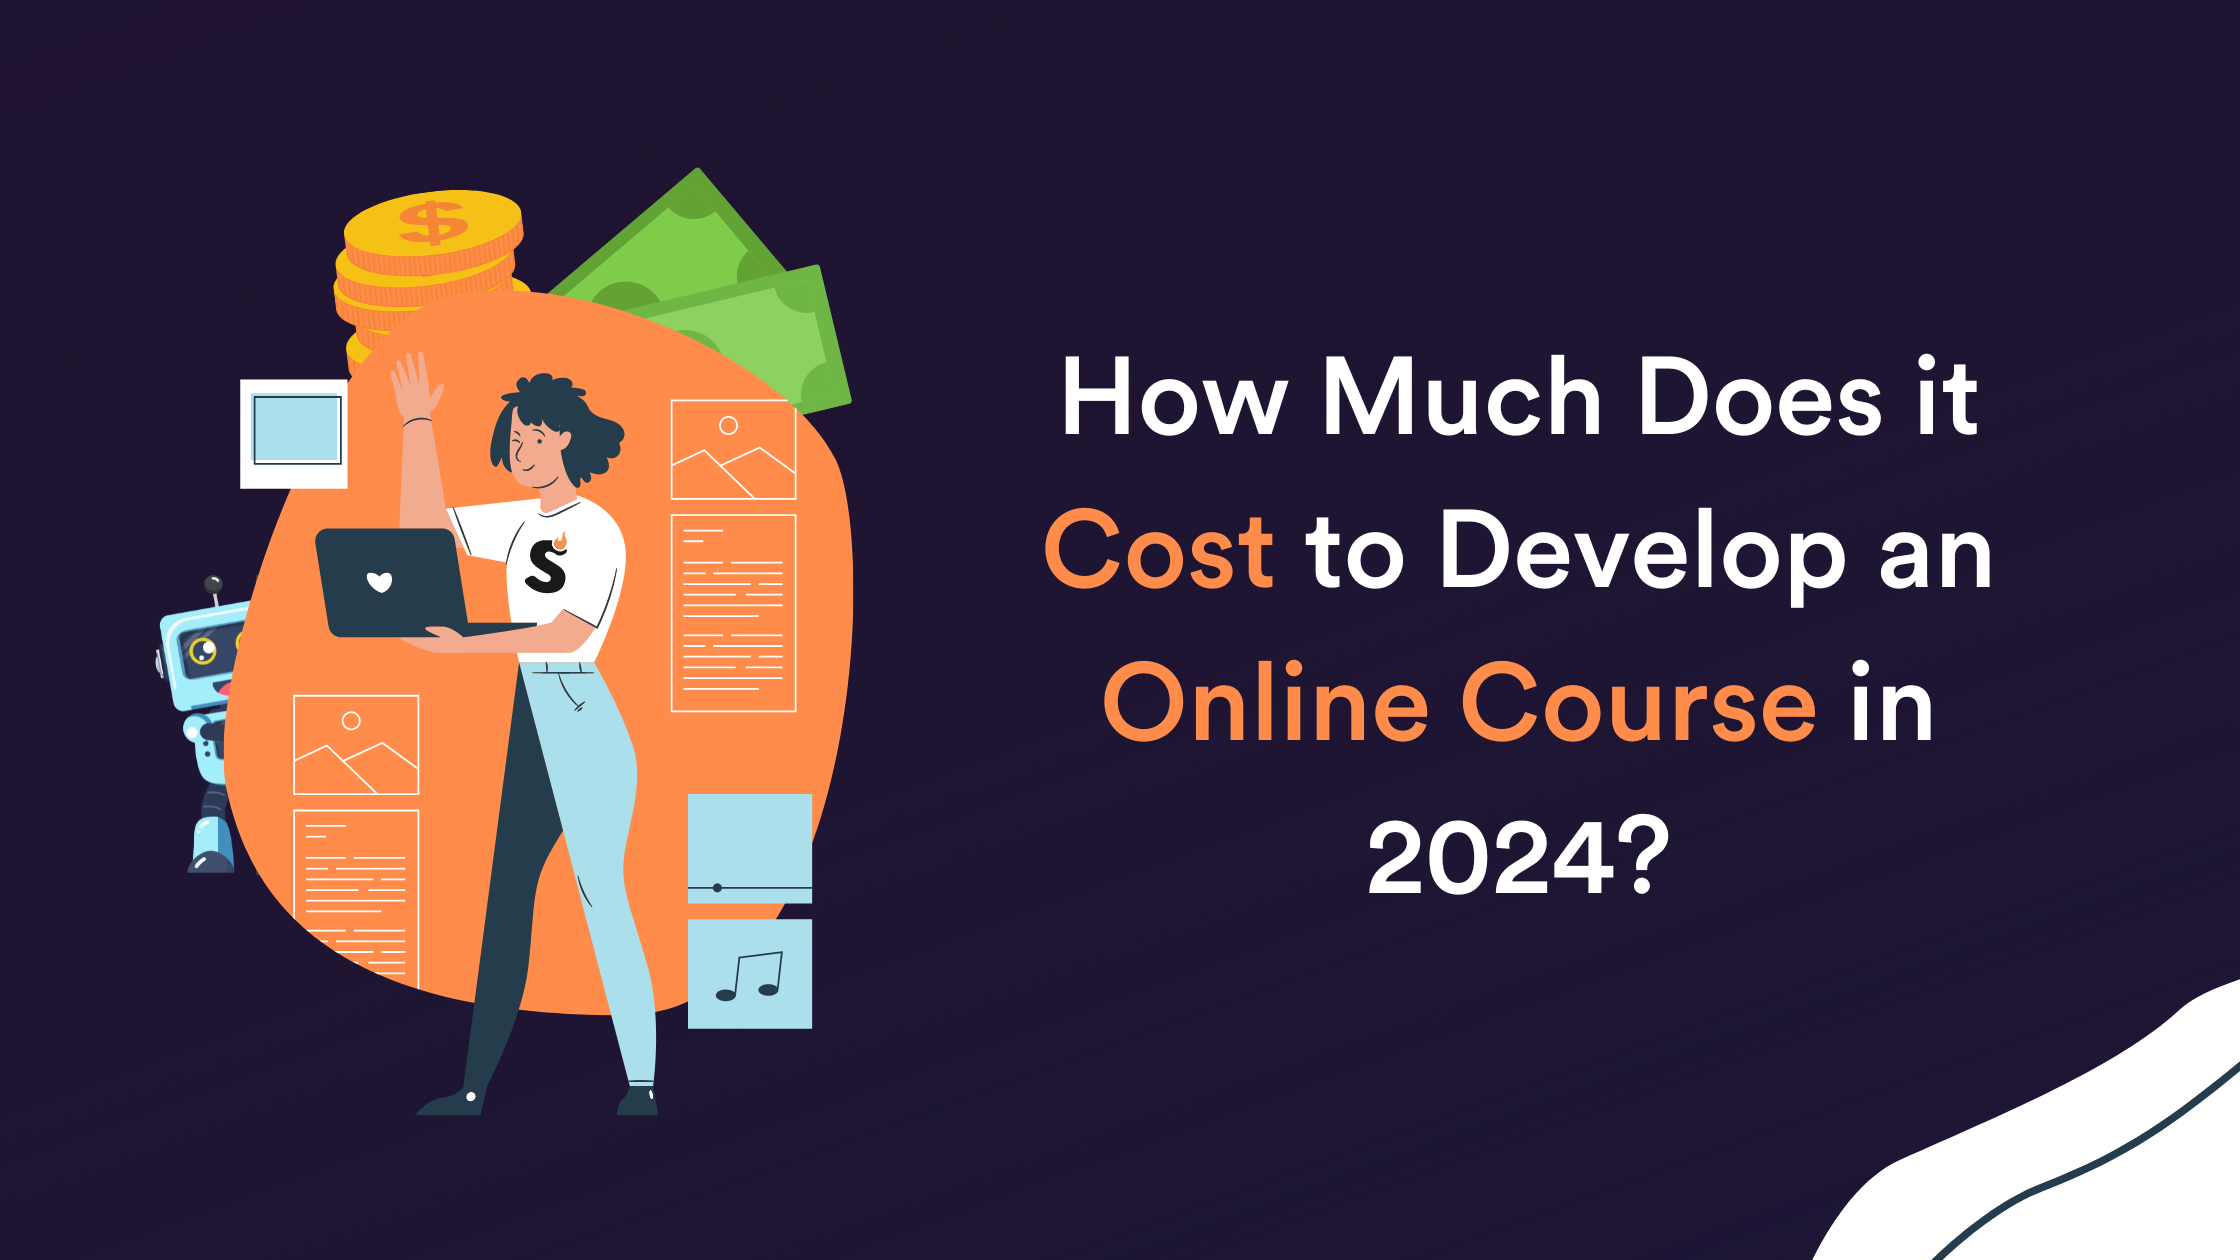 How Much Does it Cost to Develop an Online Course in 2024?